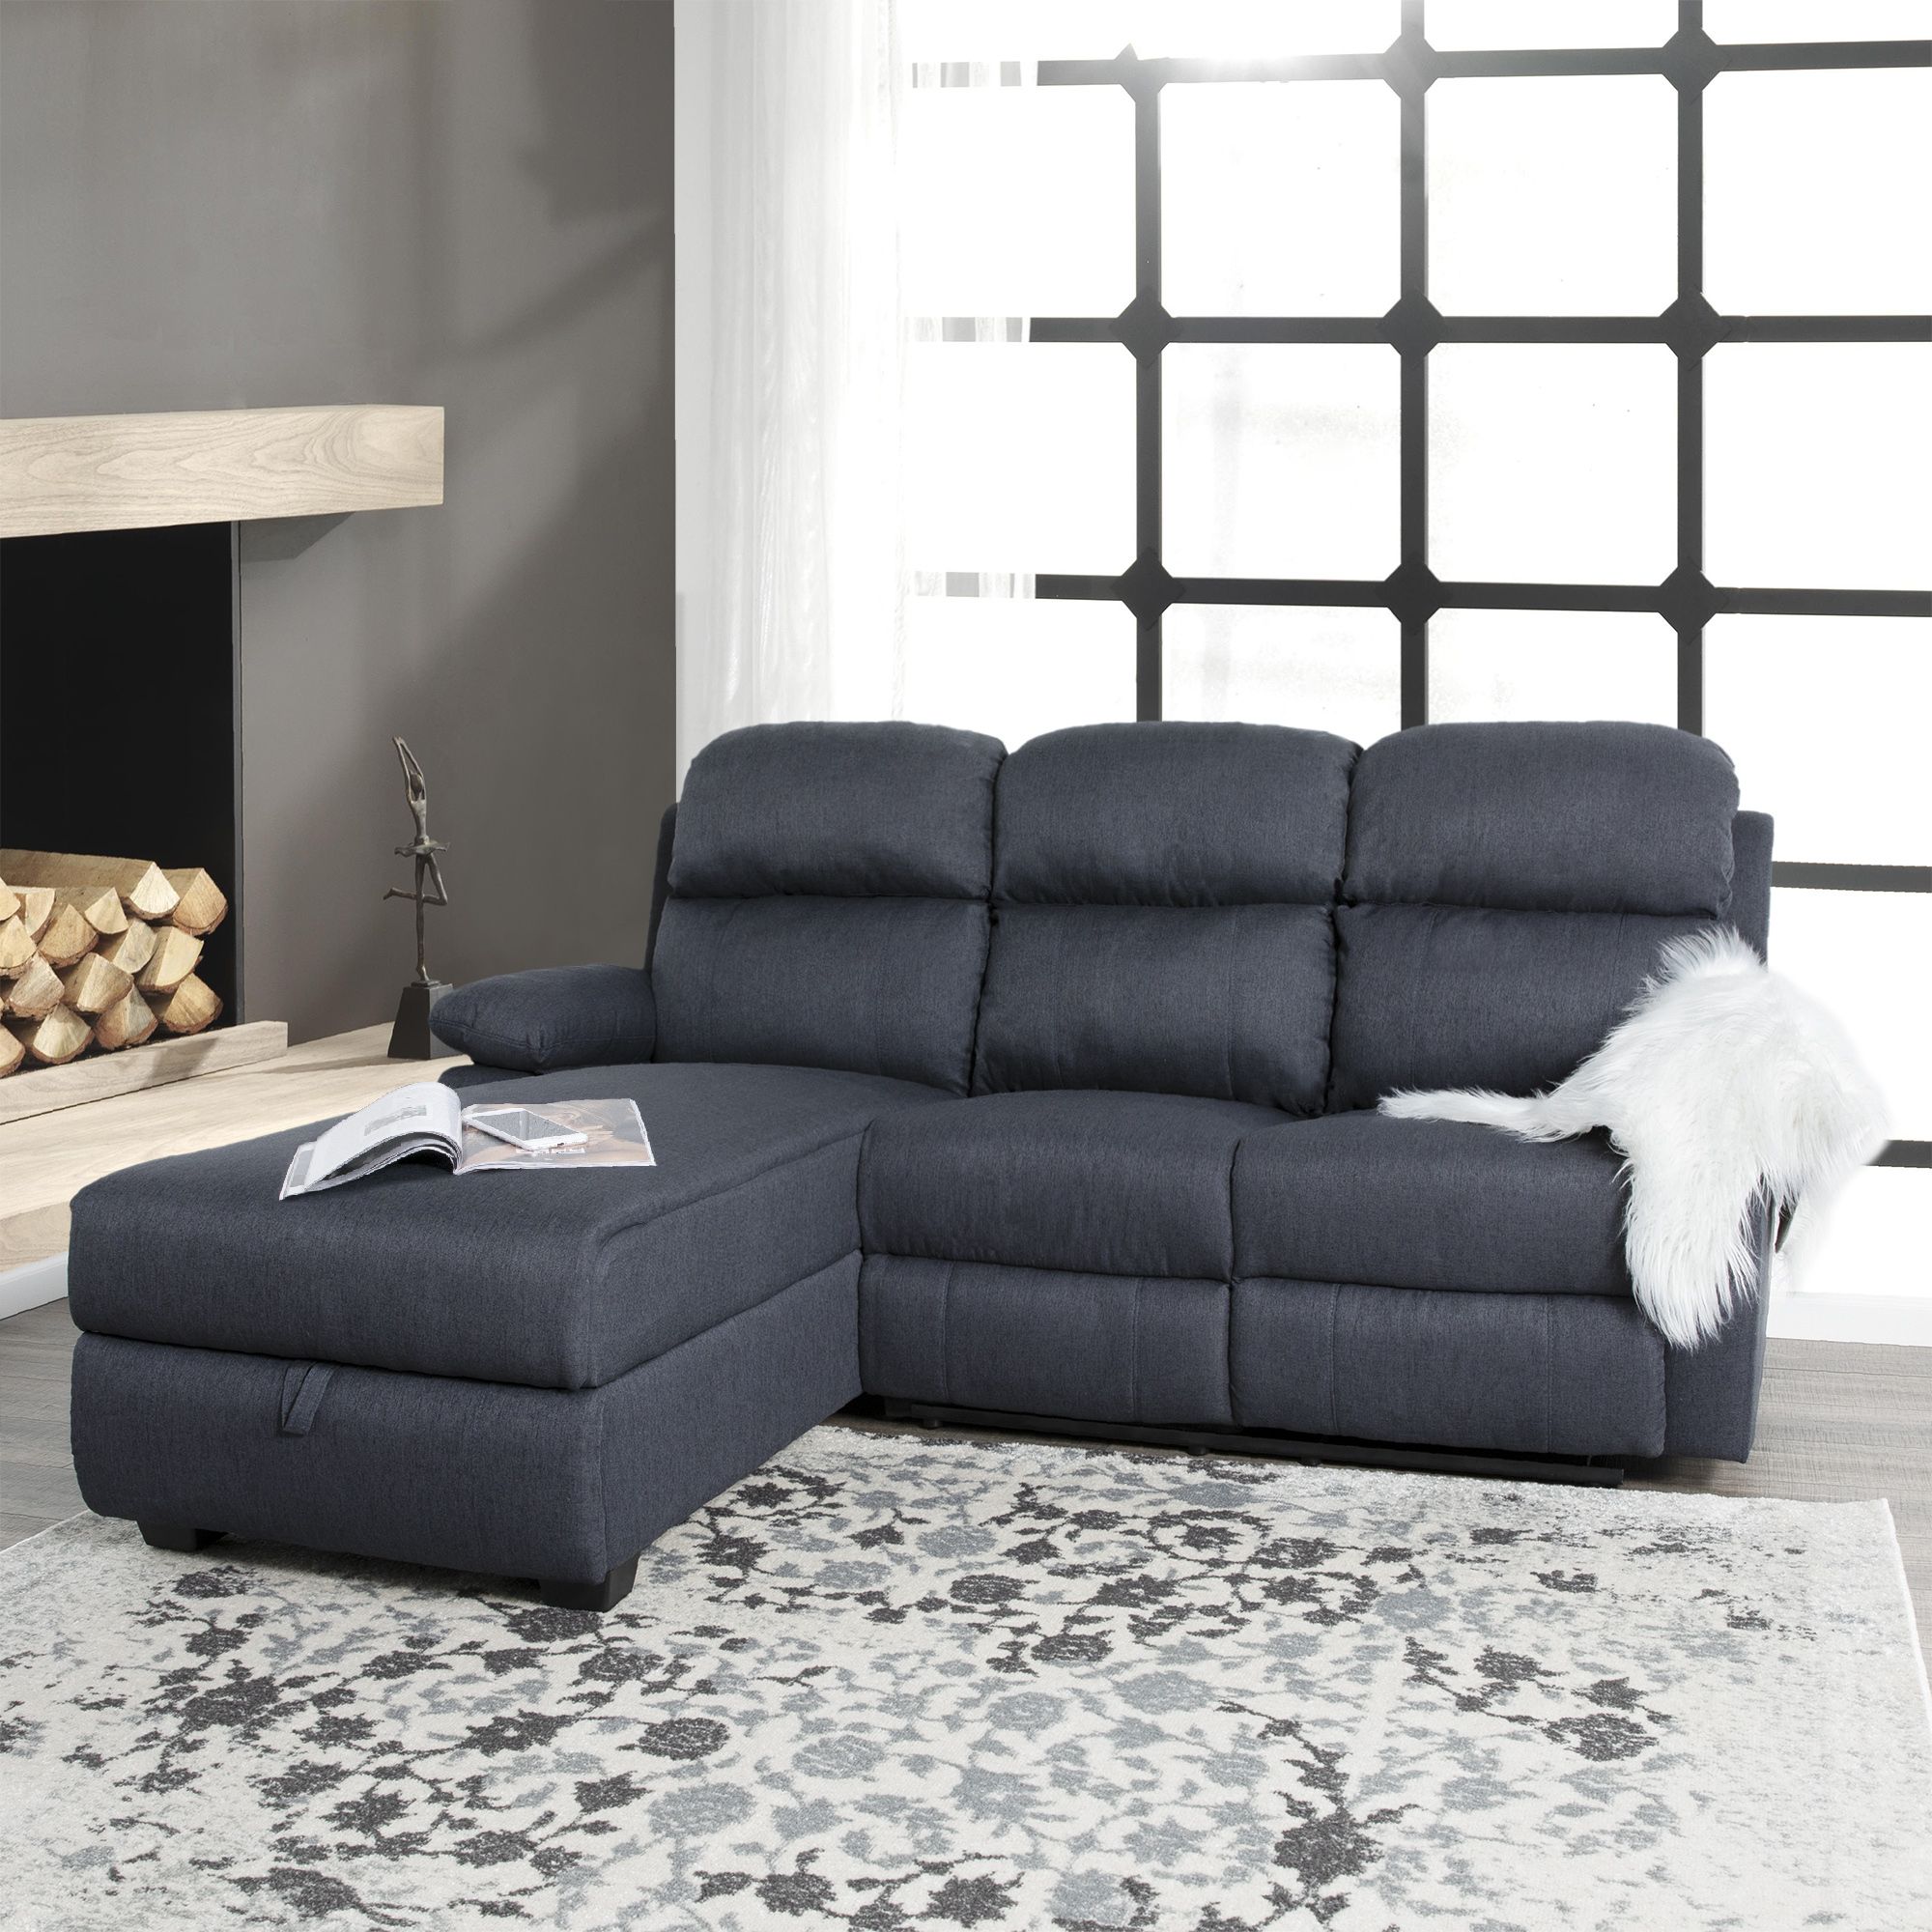 Ottomanson Recliner L Shaped Corner Sectional Sofa With Storage With Regard To L Shaped Console Tables (View 12 of 20)